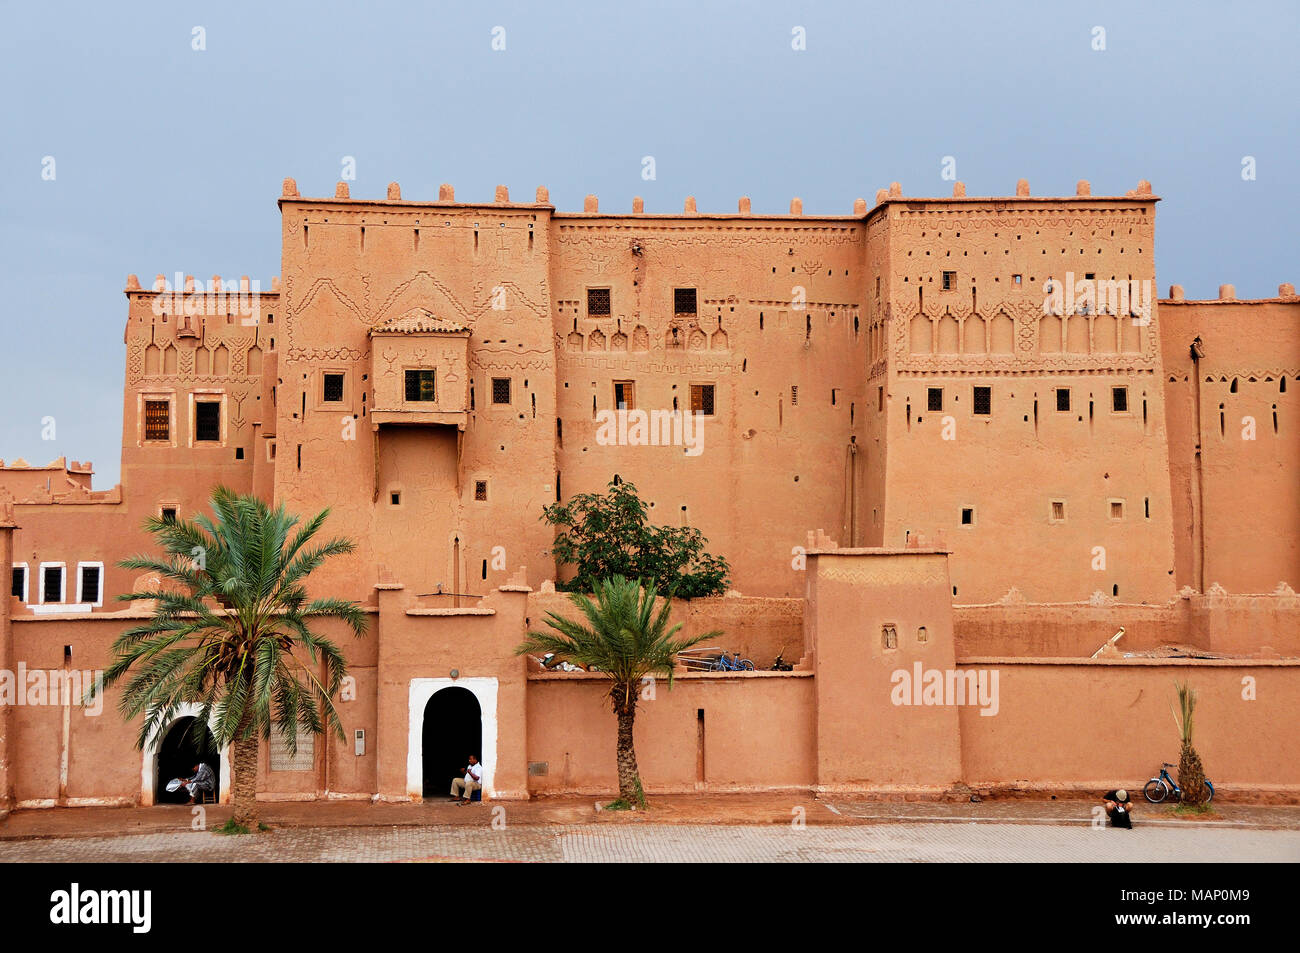 The kasbah of Taourirt in the old city of Ouarzazate. Morocco Stock Photo